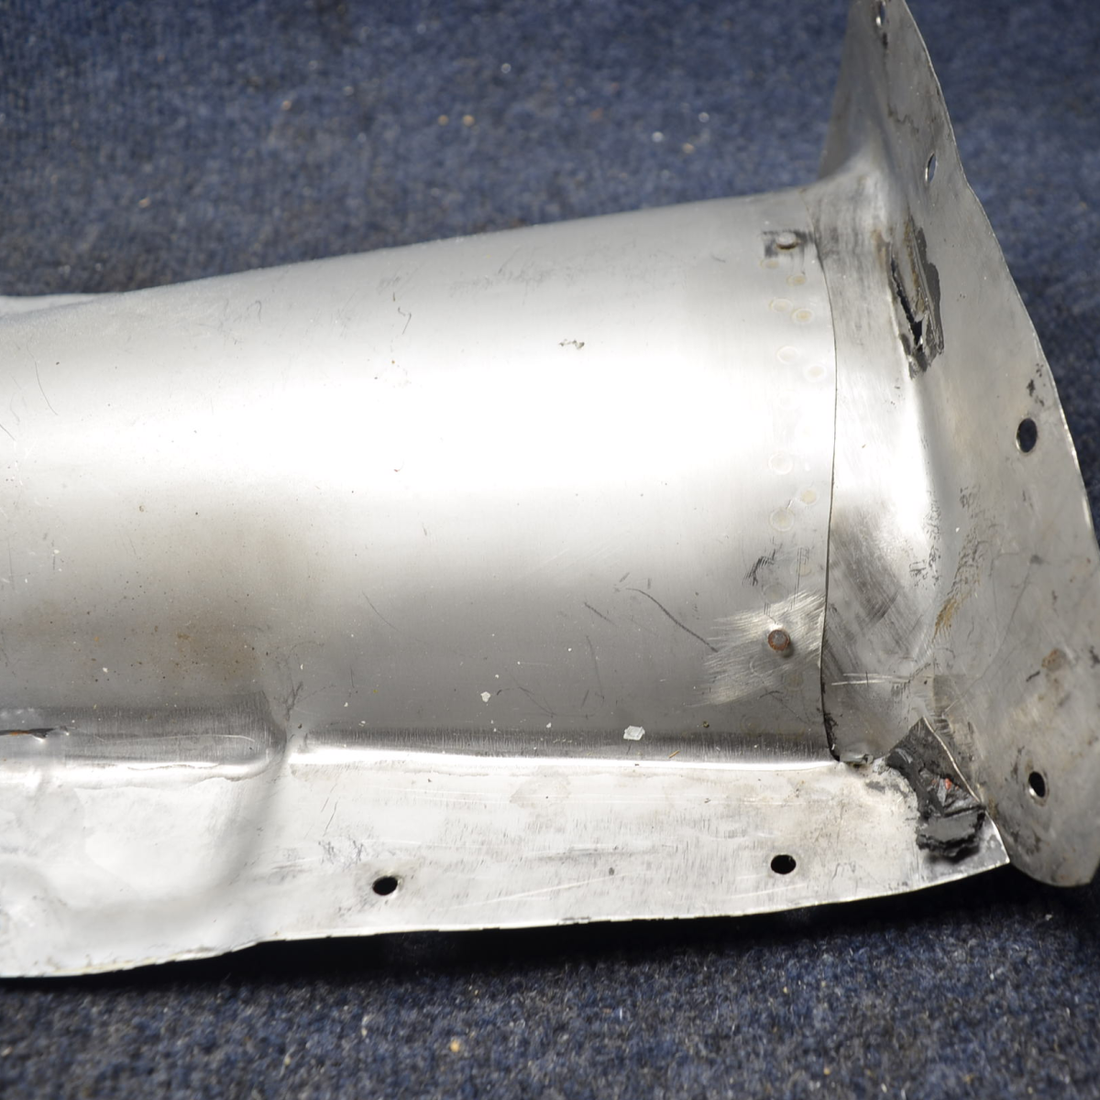 Used aircraft parts for sale, 630100-503 Mooney  [part_model] Mooney M20J EXHAUST CAVITY RH